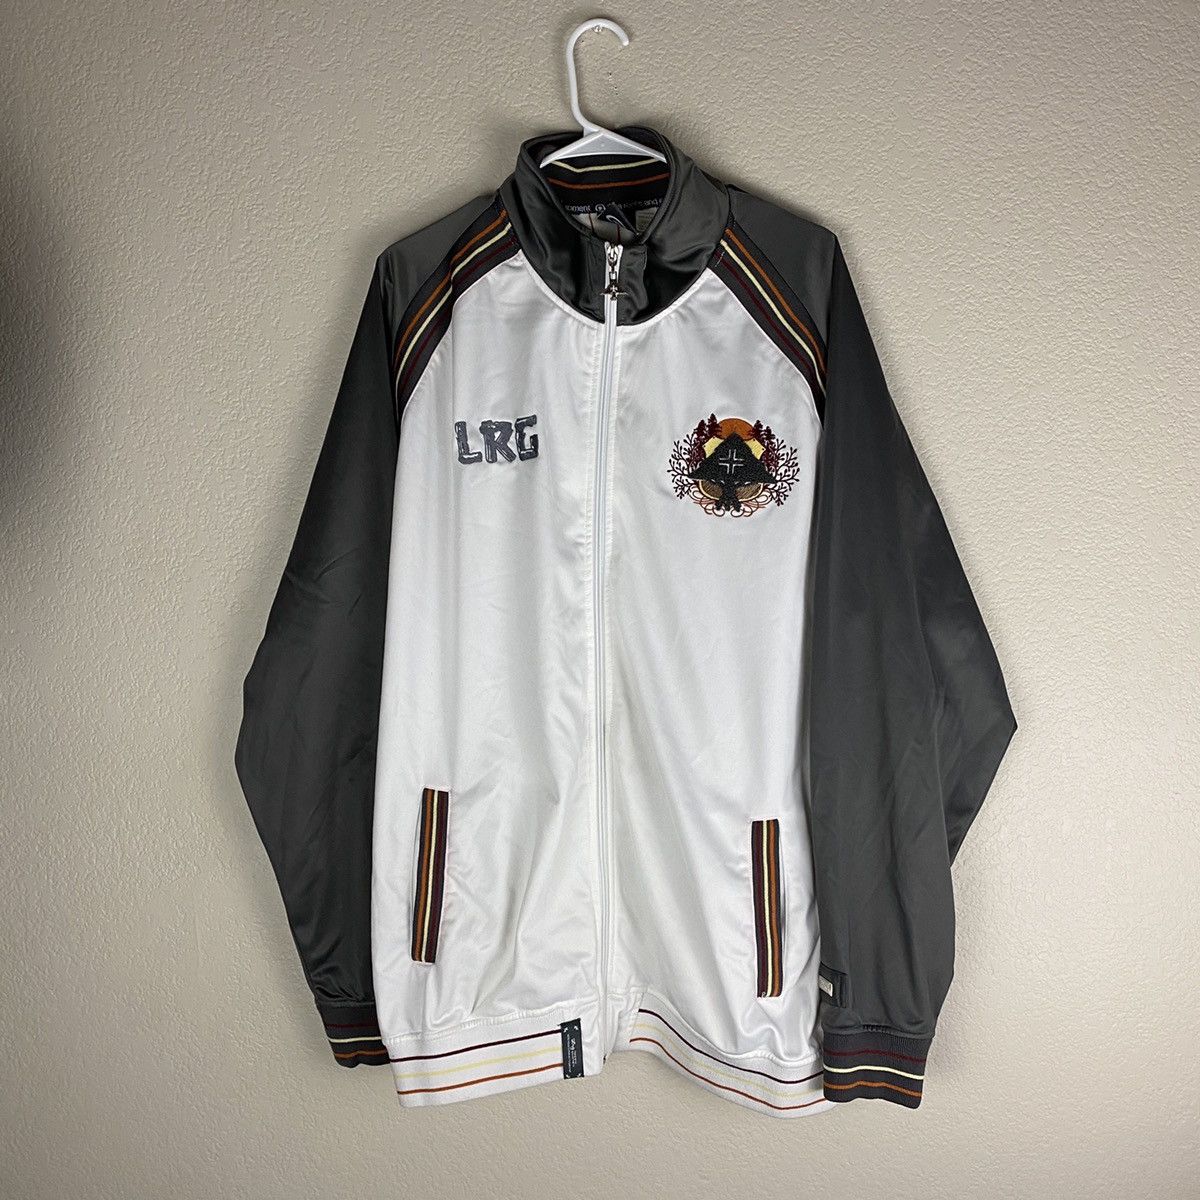 LRG LRG Roots And Equipment Track Jacket | Grailed